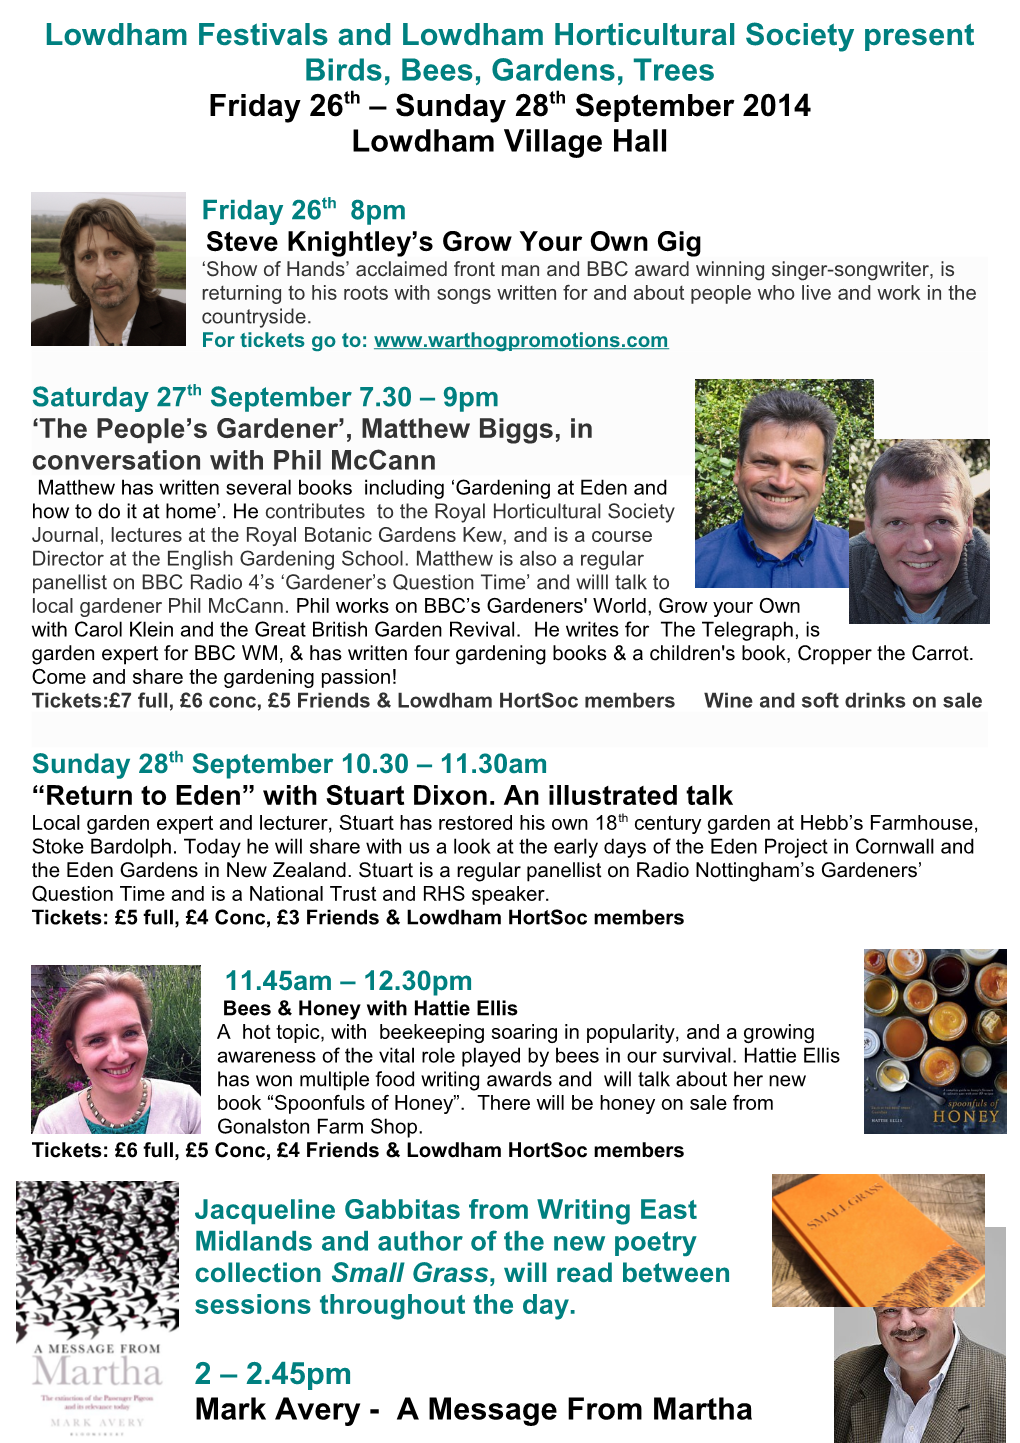 Lowdham Festivals and Lowdham Horticultural Society Presents